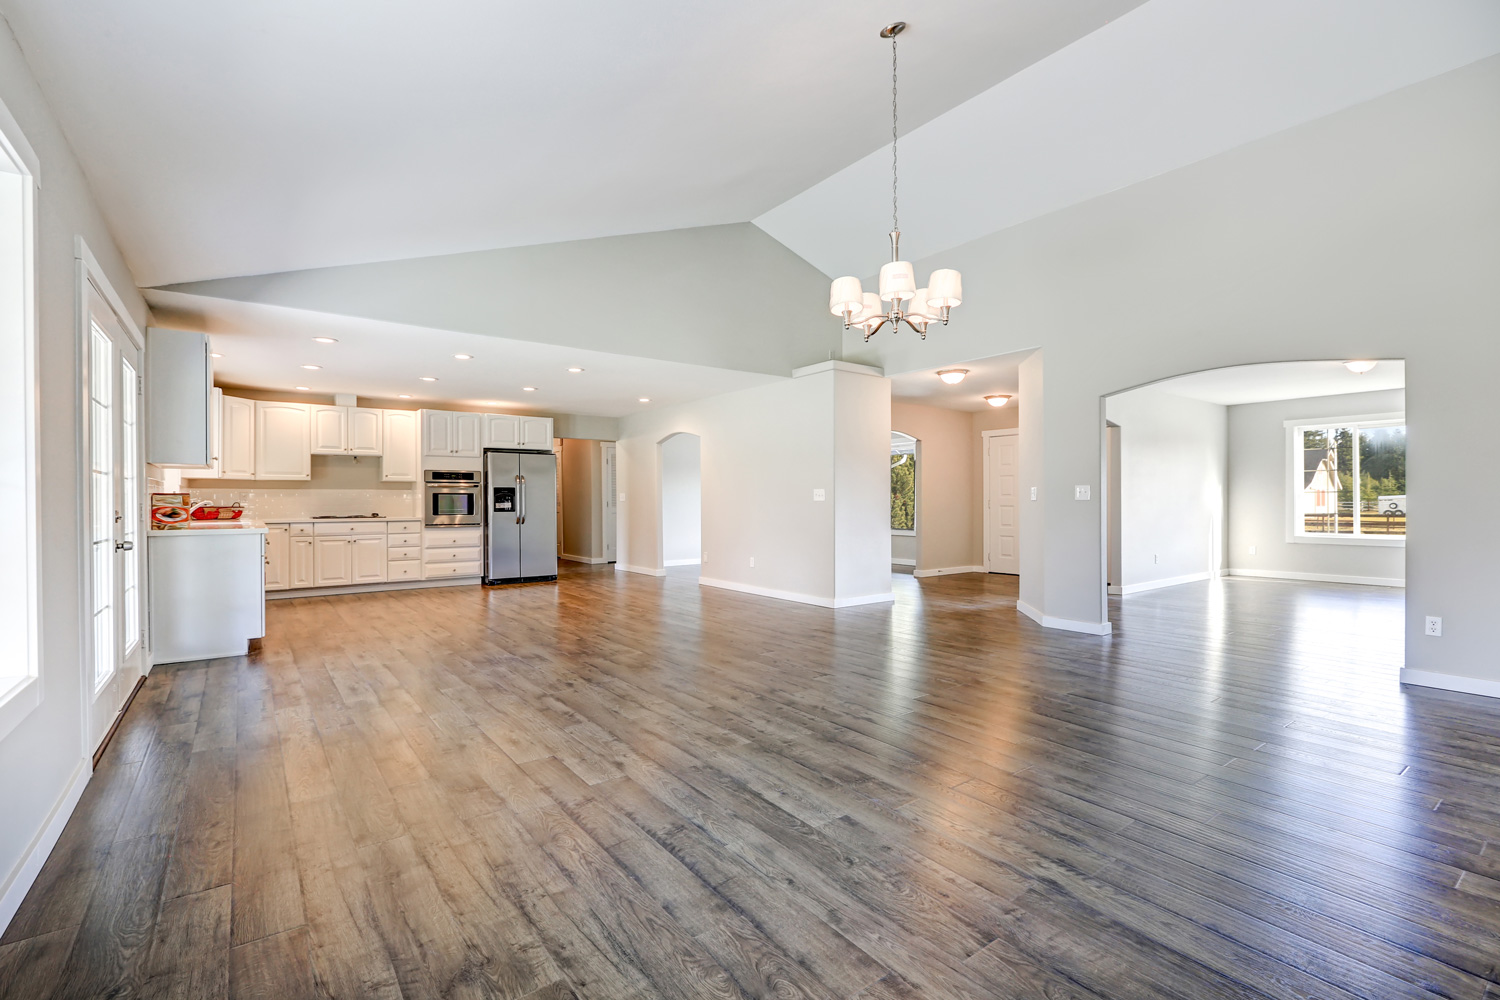 Spacious rambler home interior with vaulted ceiling over glossy laminate floor.